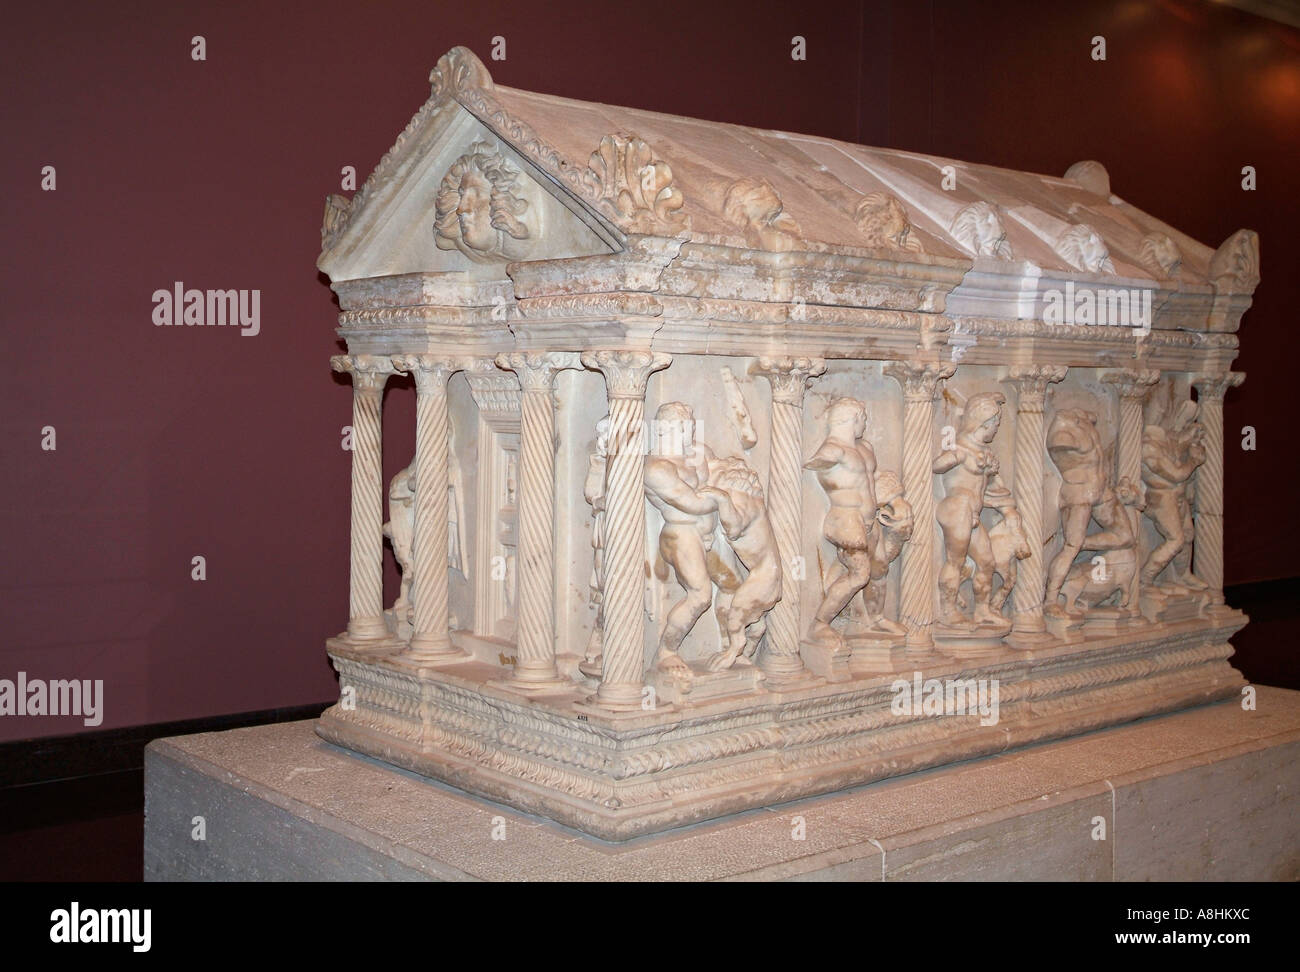 Antiquities from the Roman period on display in the Sarcophagus Room of Antalya Regional Museum Antalya Turkey Stock Photo